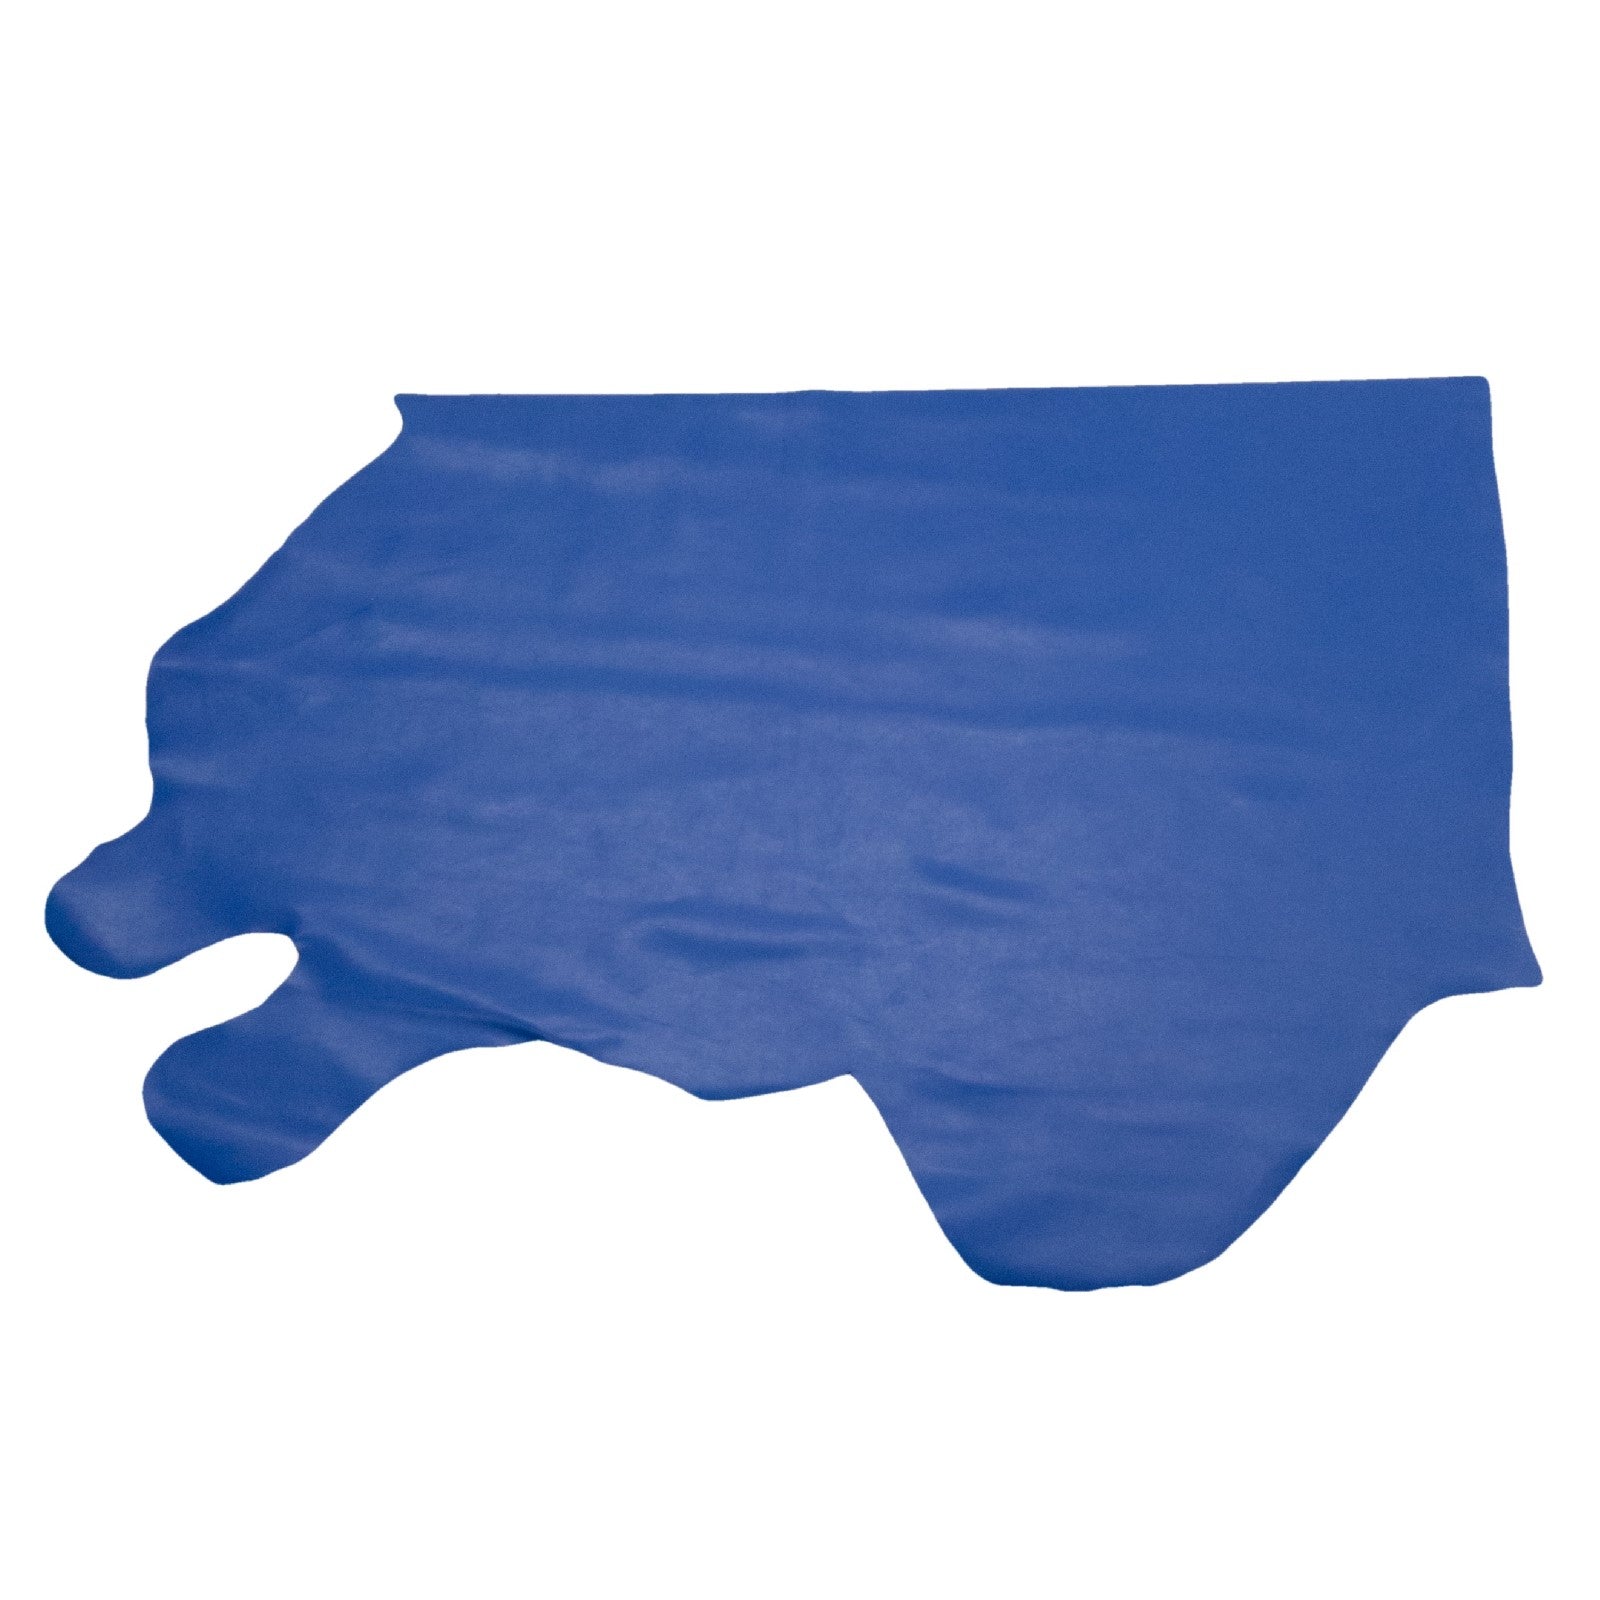 Bills Royal Blue, 3-3.5 oz Cow Hides, Starting Lineup, Bottom Piece / 6.5-7.5 Sq Ft | The Leather Guy